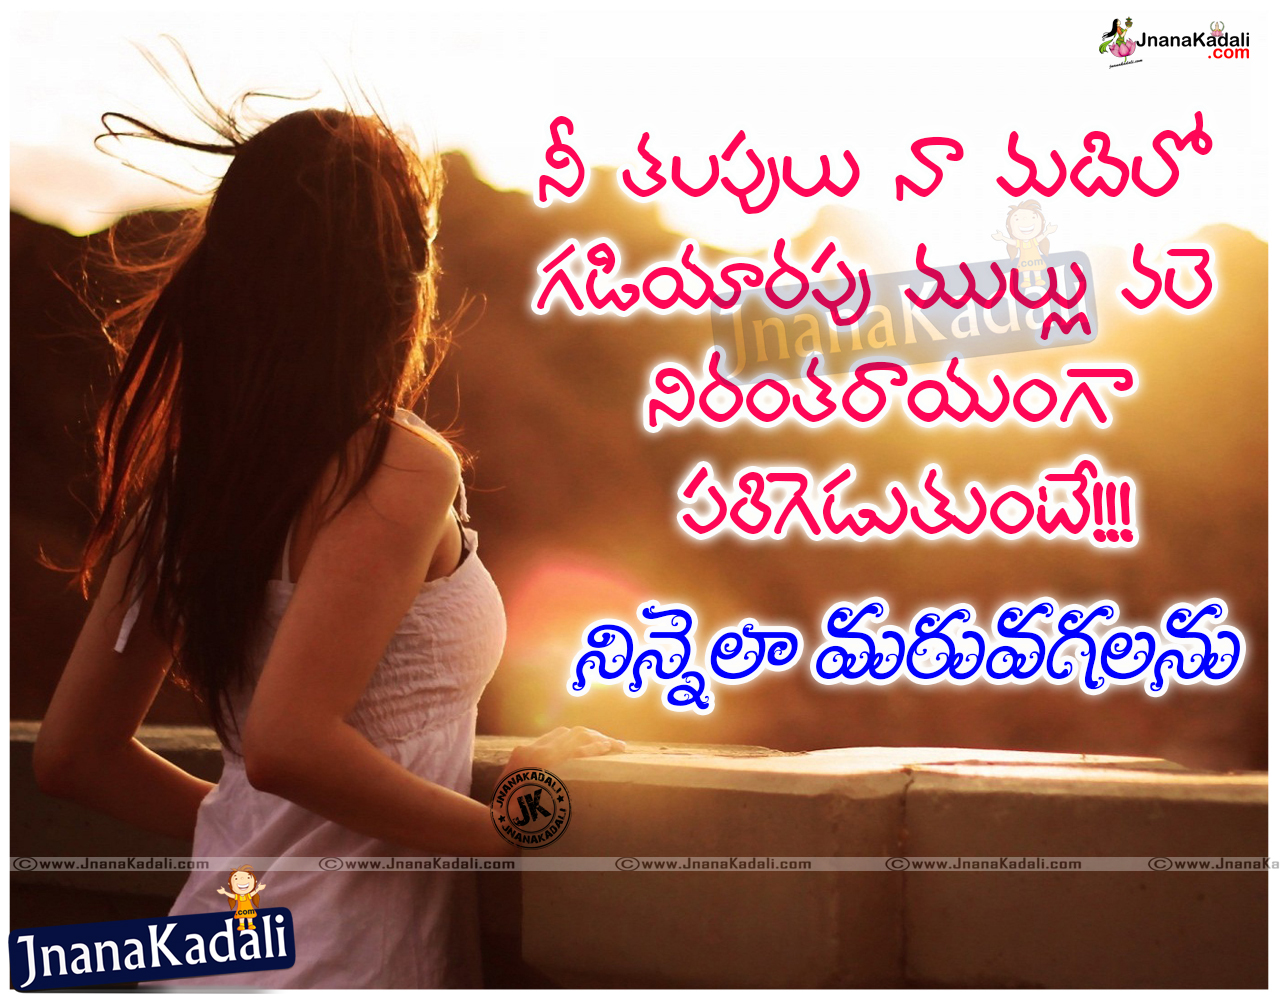 Telugu dating ✔️ 2018 in best quotes and 2021 love 38 Best